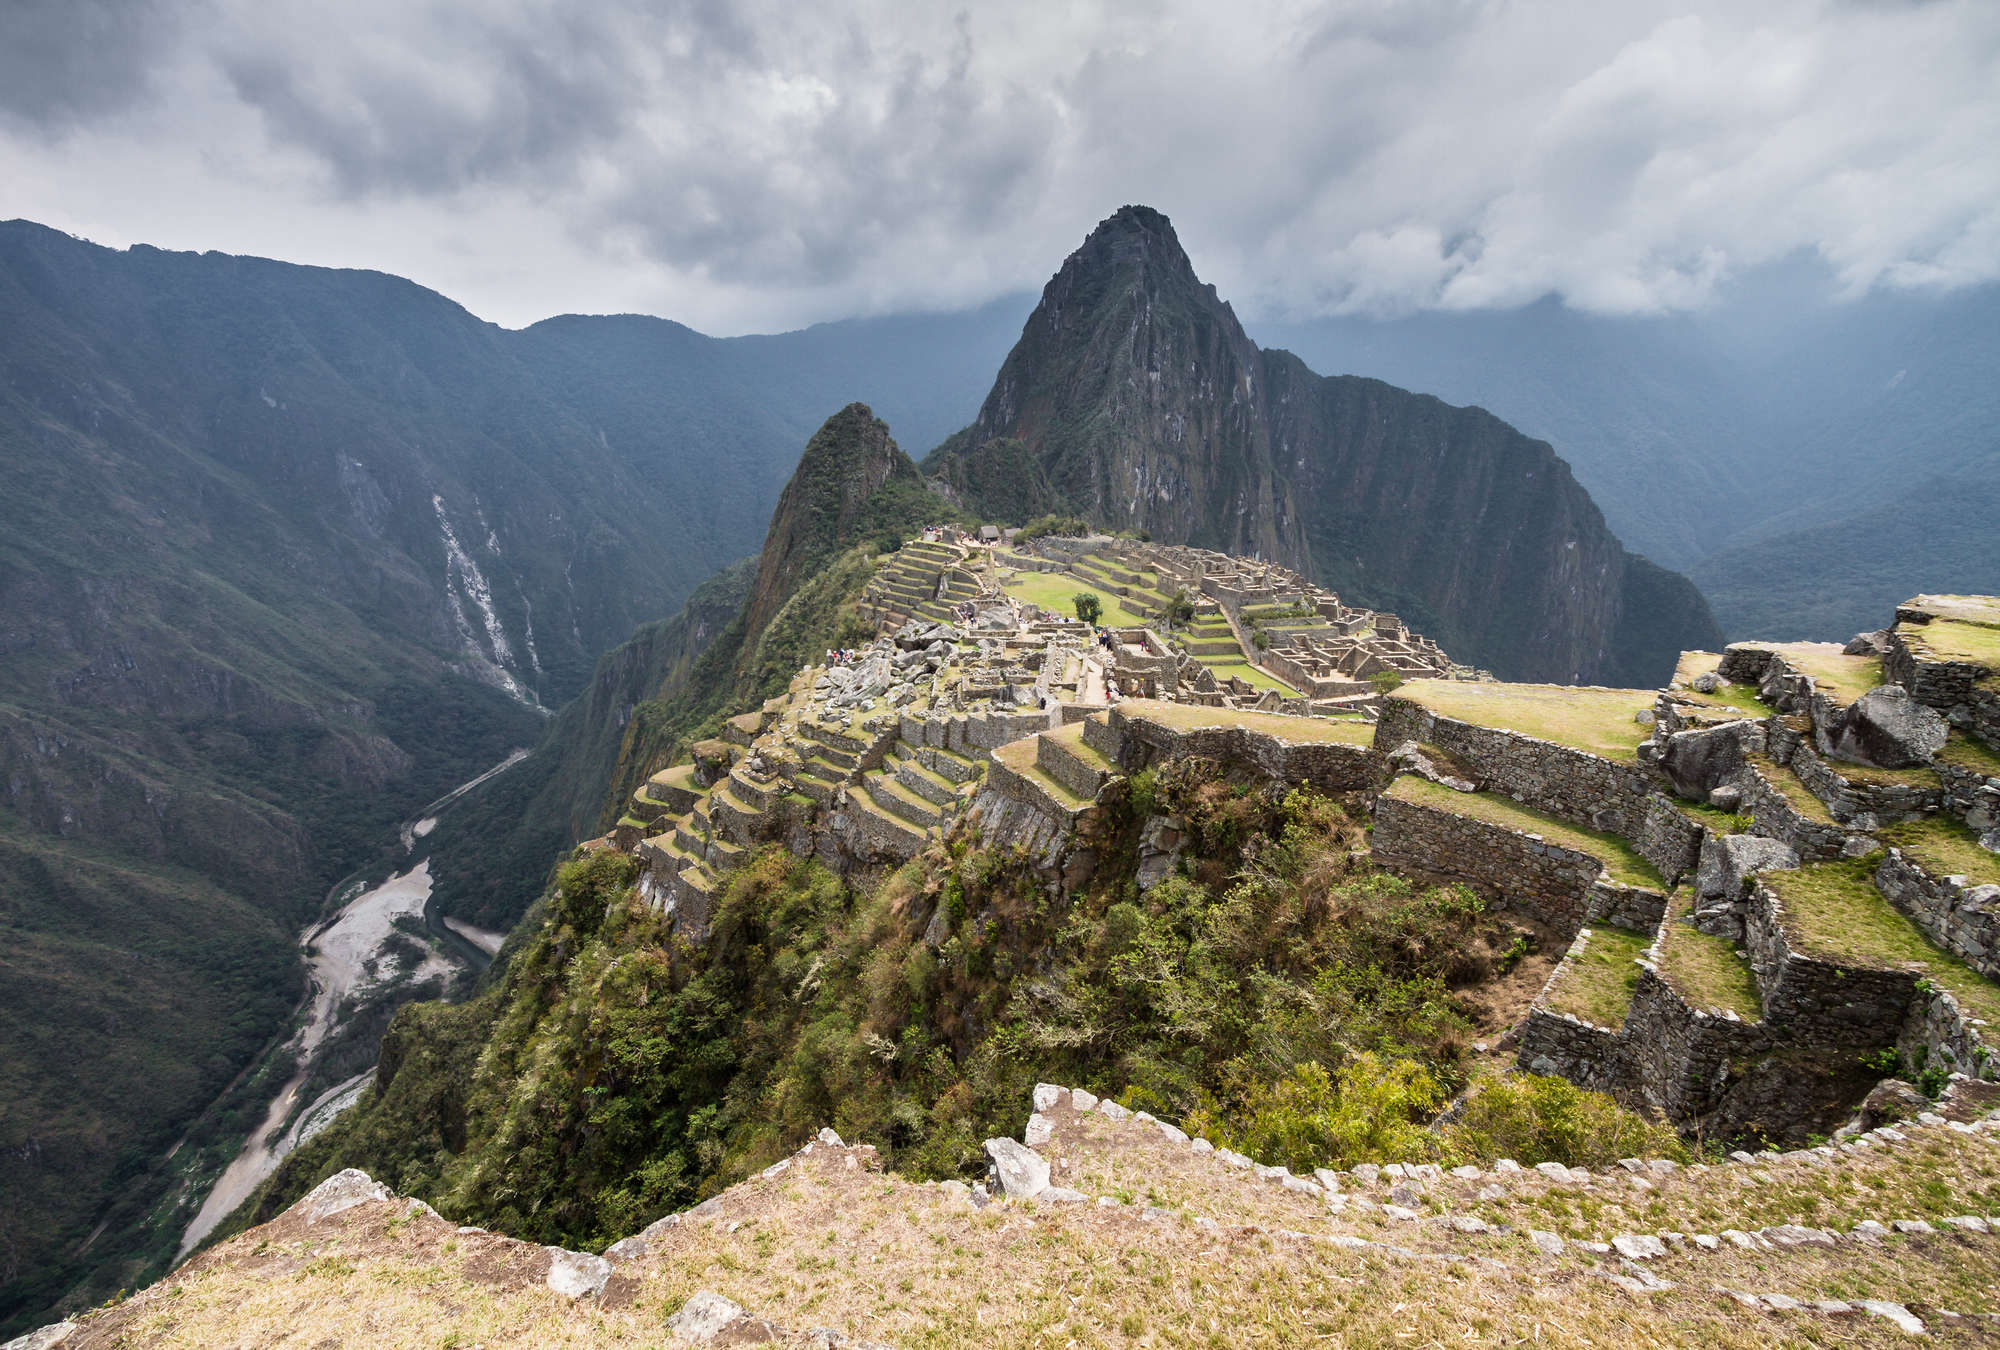             Photo wallpaper picturesque valley view from Machu Picchu
        